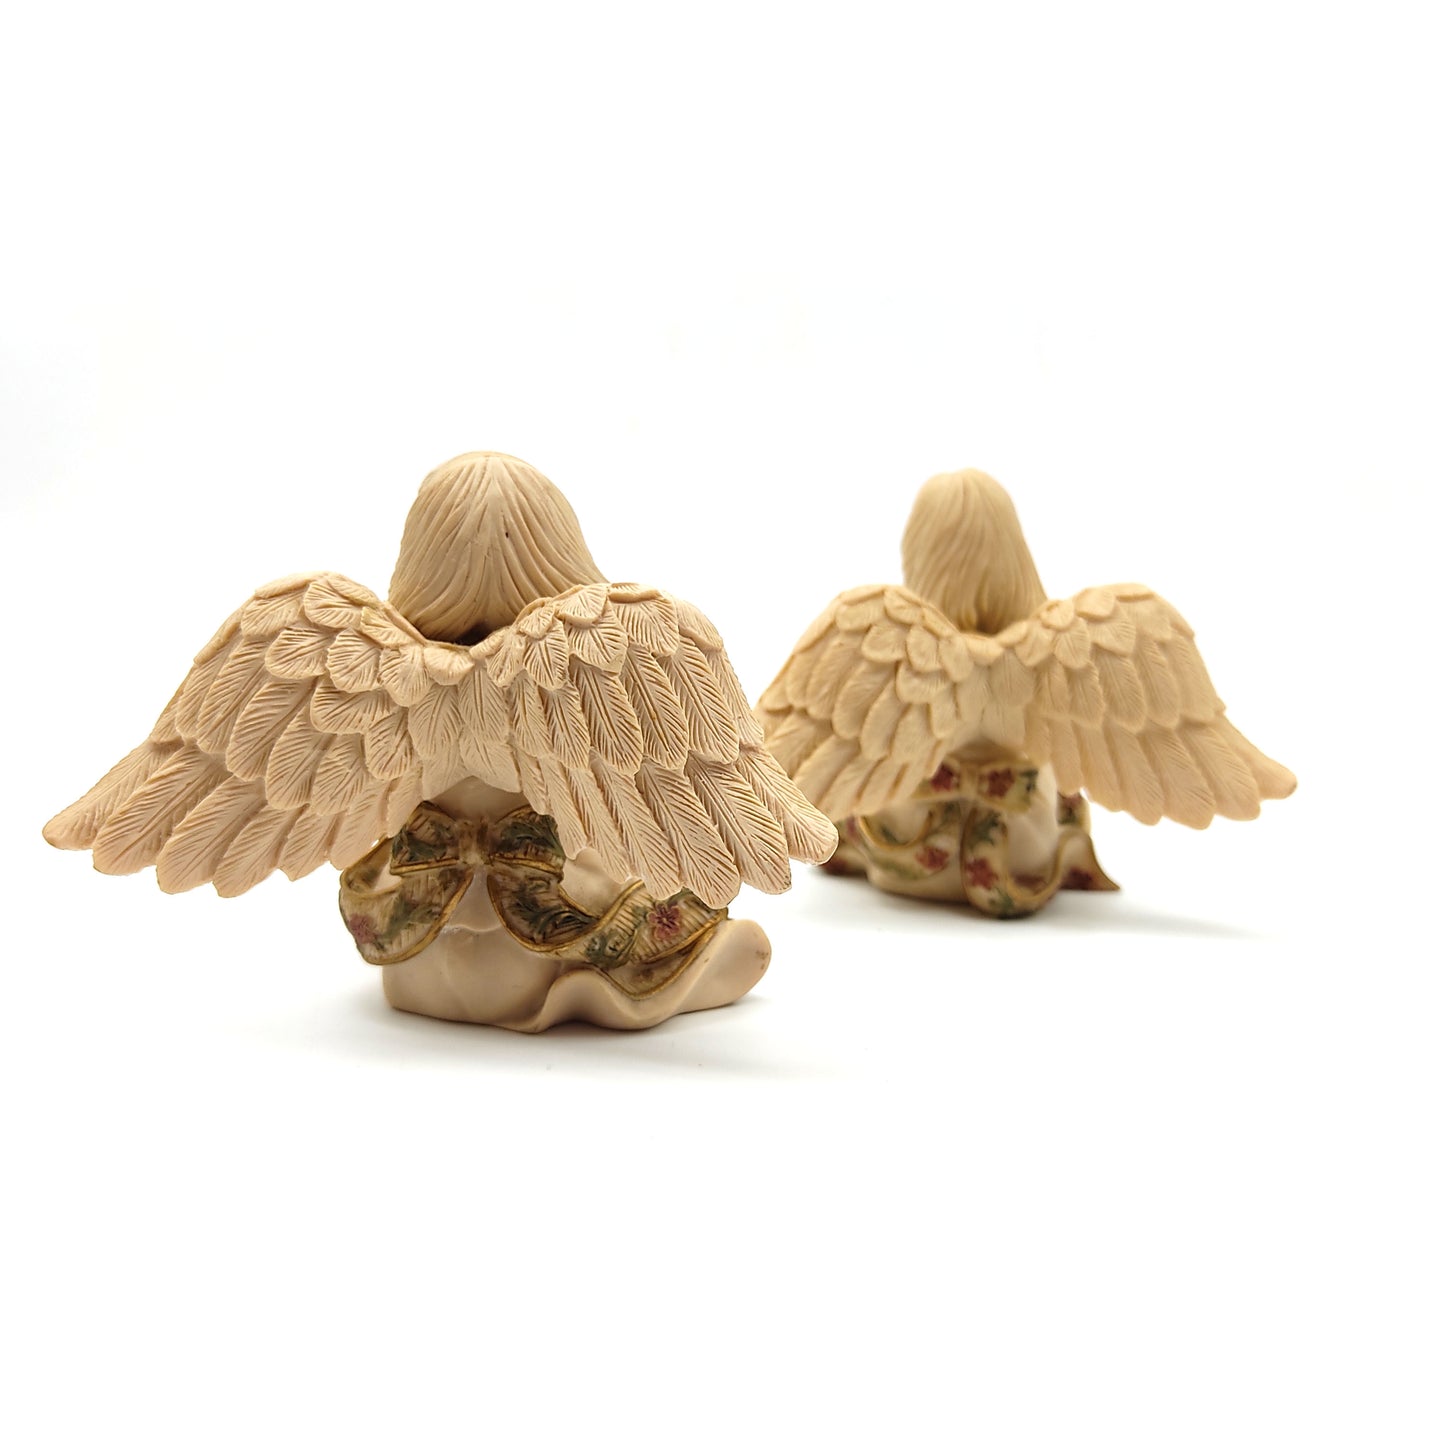 Vintage Sarah's Angels "September" and "August" Resin Collectible Statue Figurines